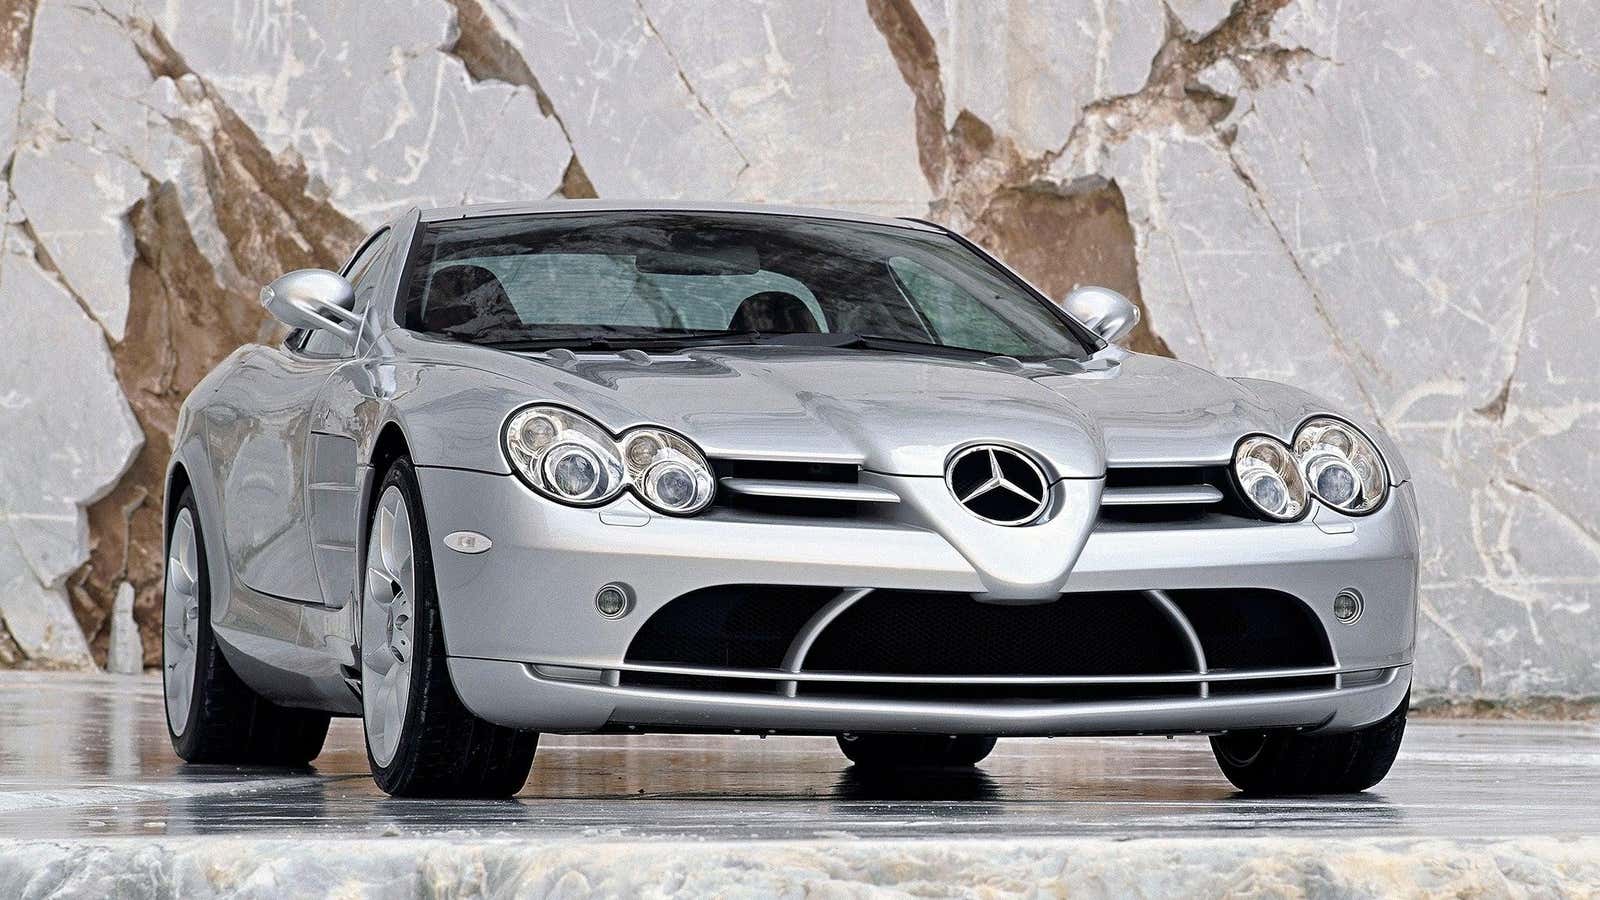 Image for Doing A Brake Job On A Mercedes-Benz SLR McLaren Can Cost More Than $100,000